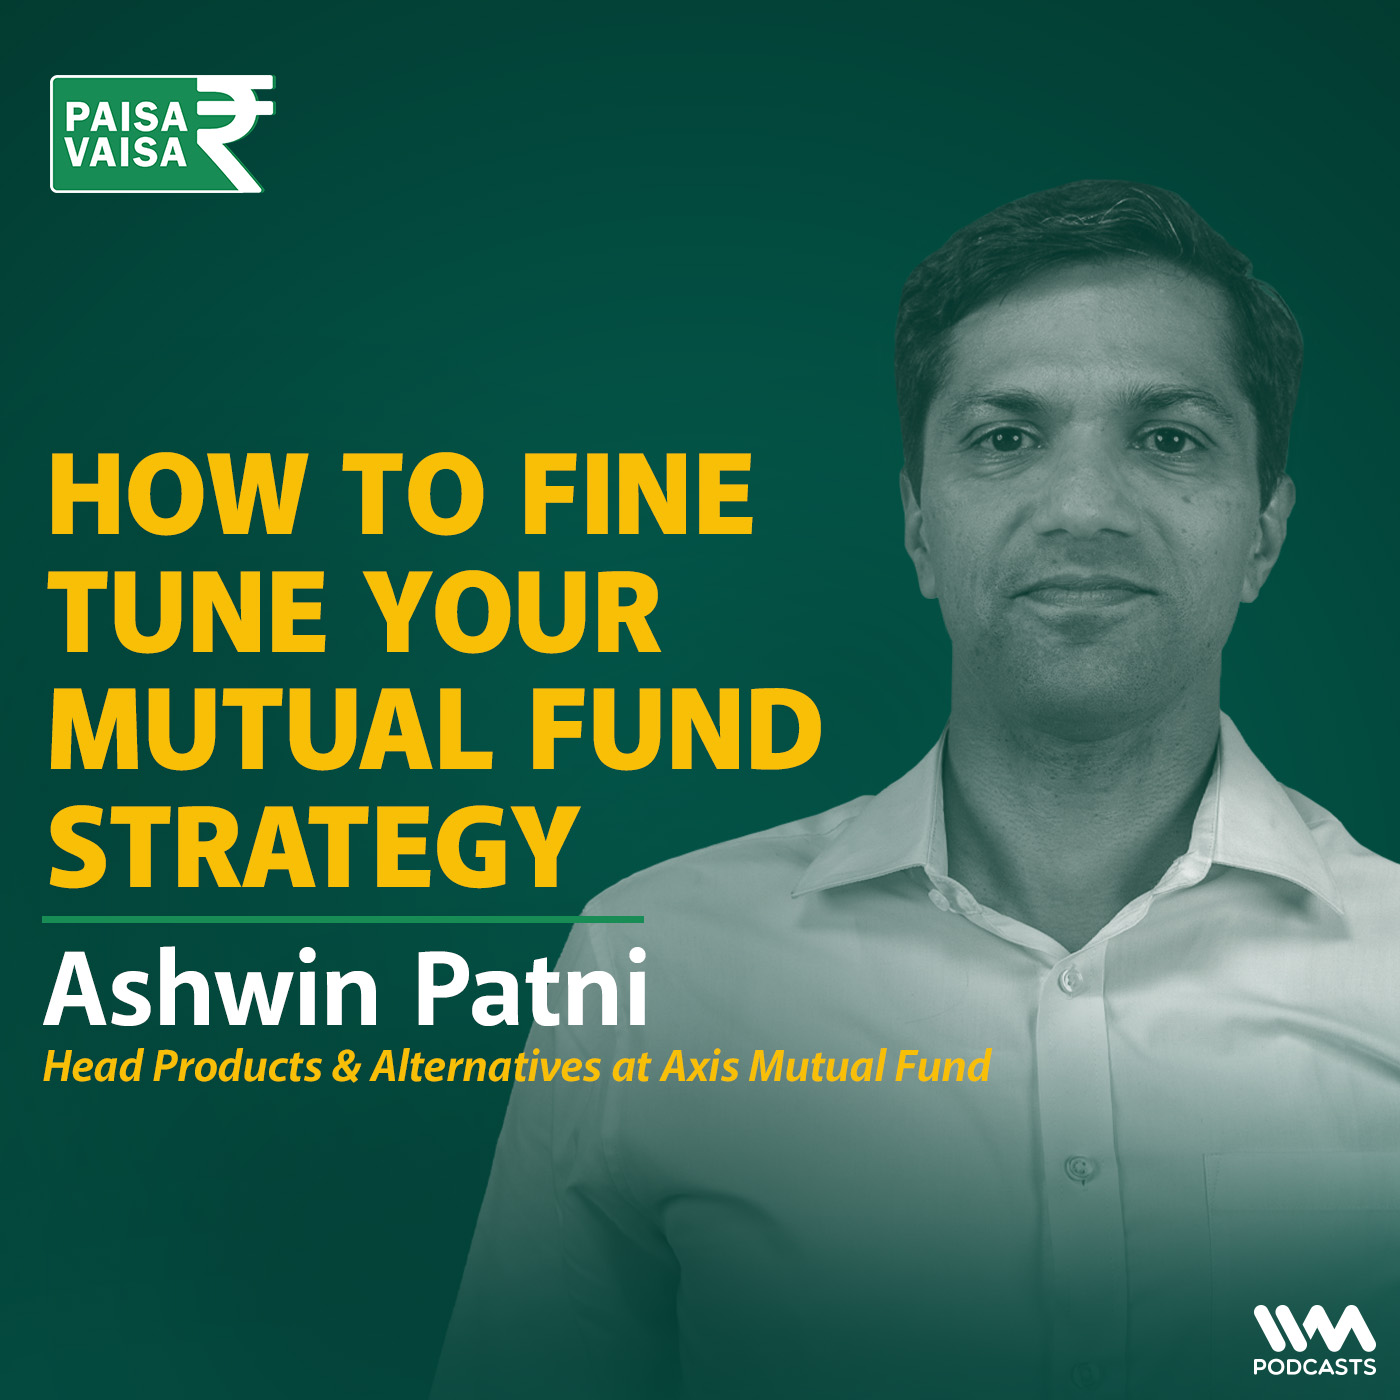 How to Fine Tune your Mutual Fund Strategy